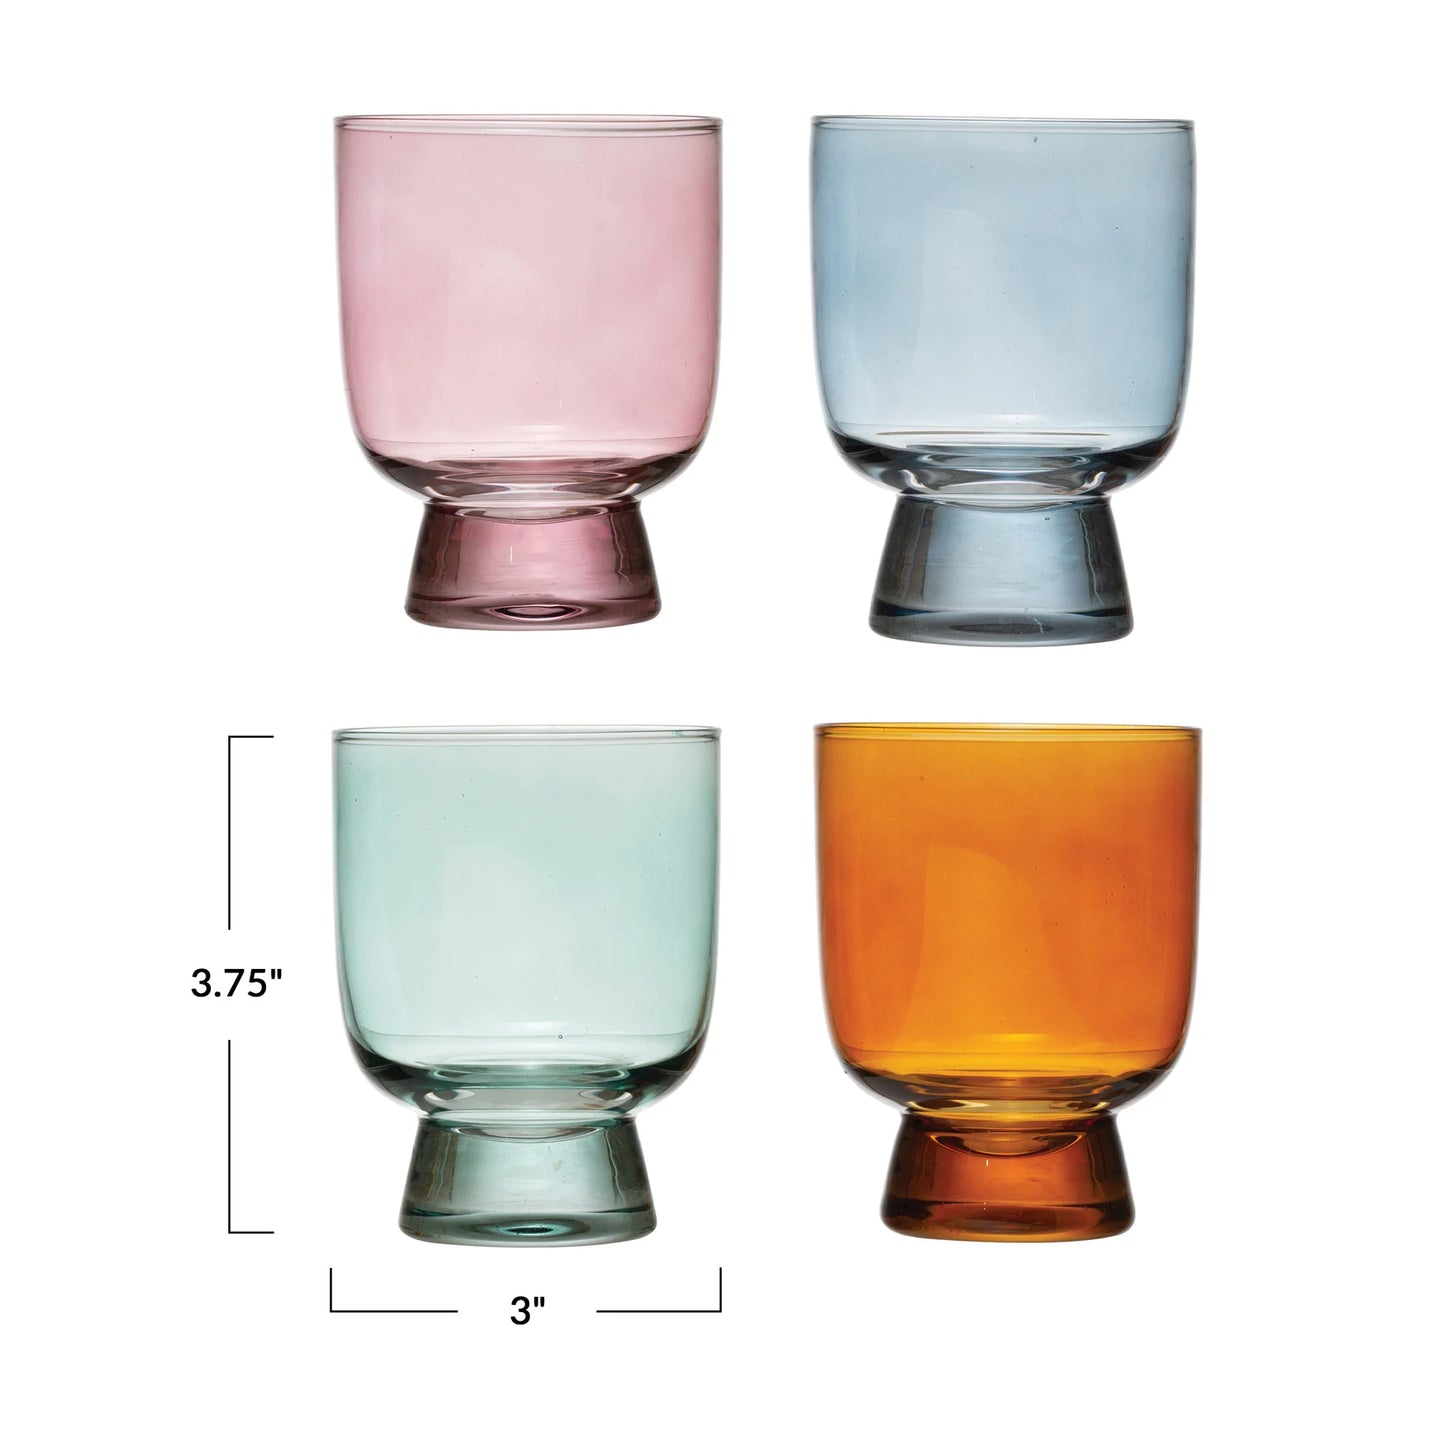 6 oz. Drinking Glass, 4 Colors